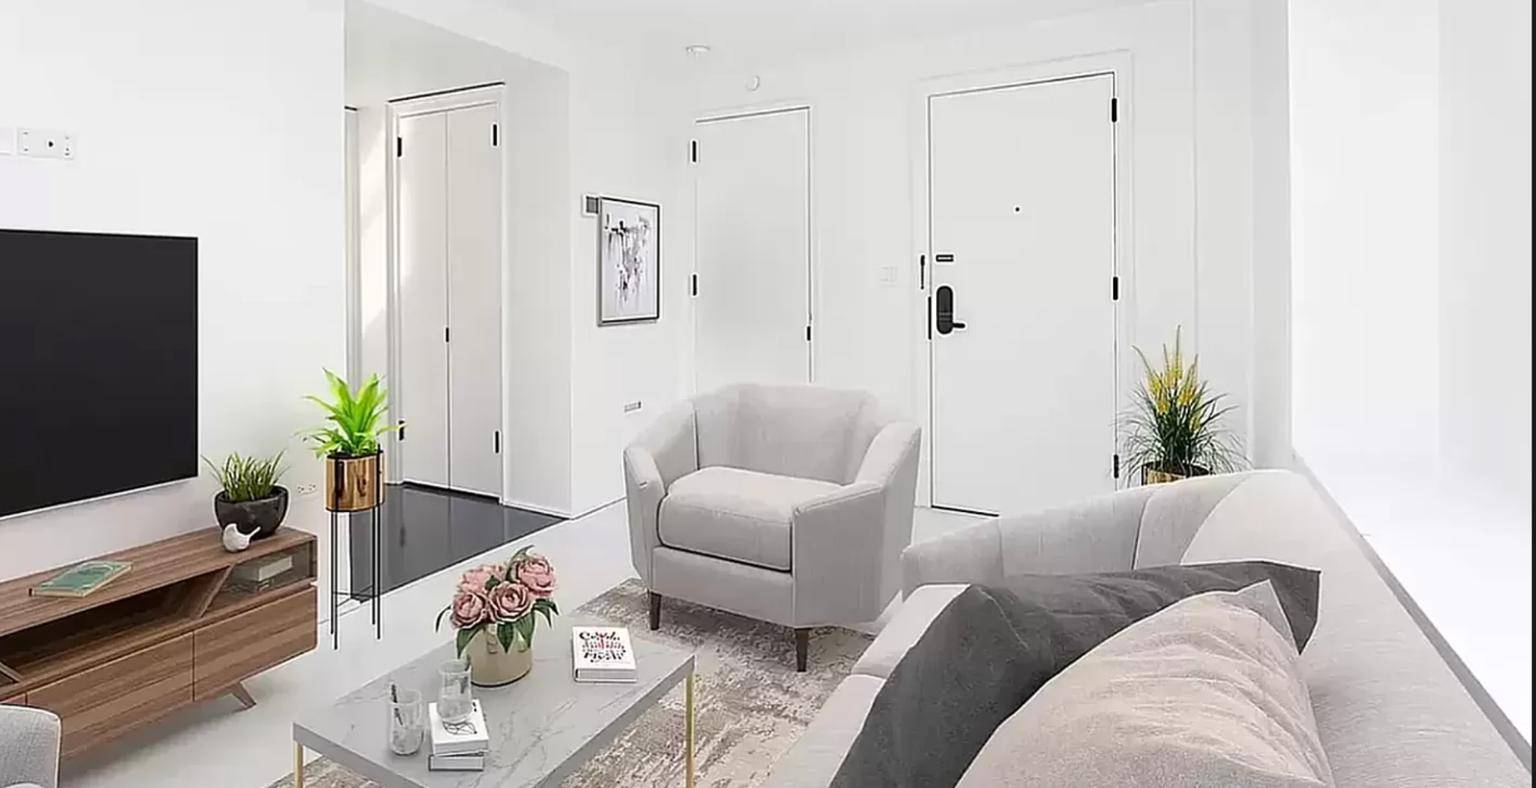 A brand new full service luxury destination that combines condo grade renovations with efficient layouts amp ; a bespoke set of thoughtfully appointed amenities.